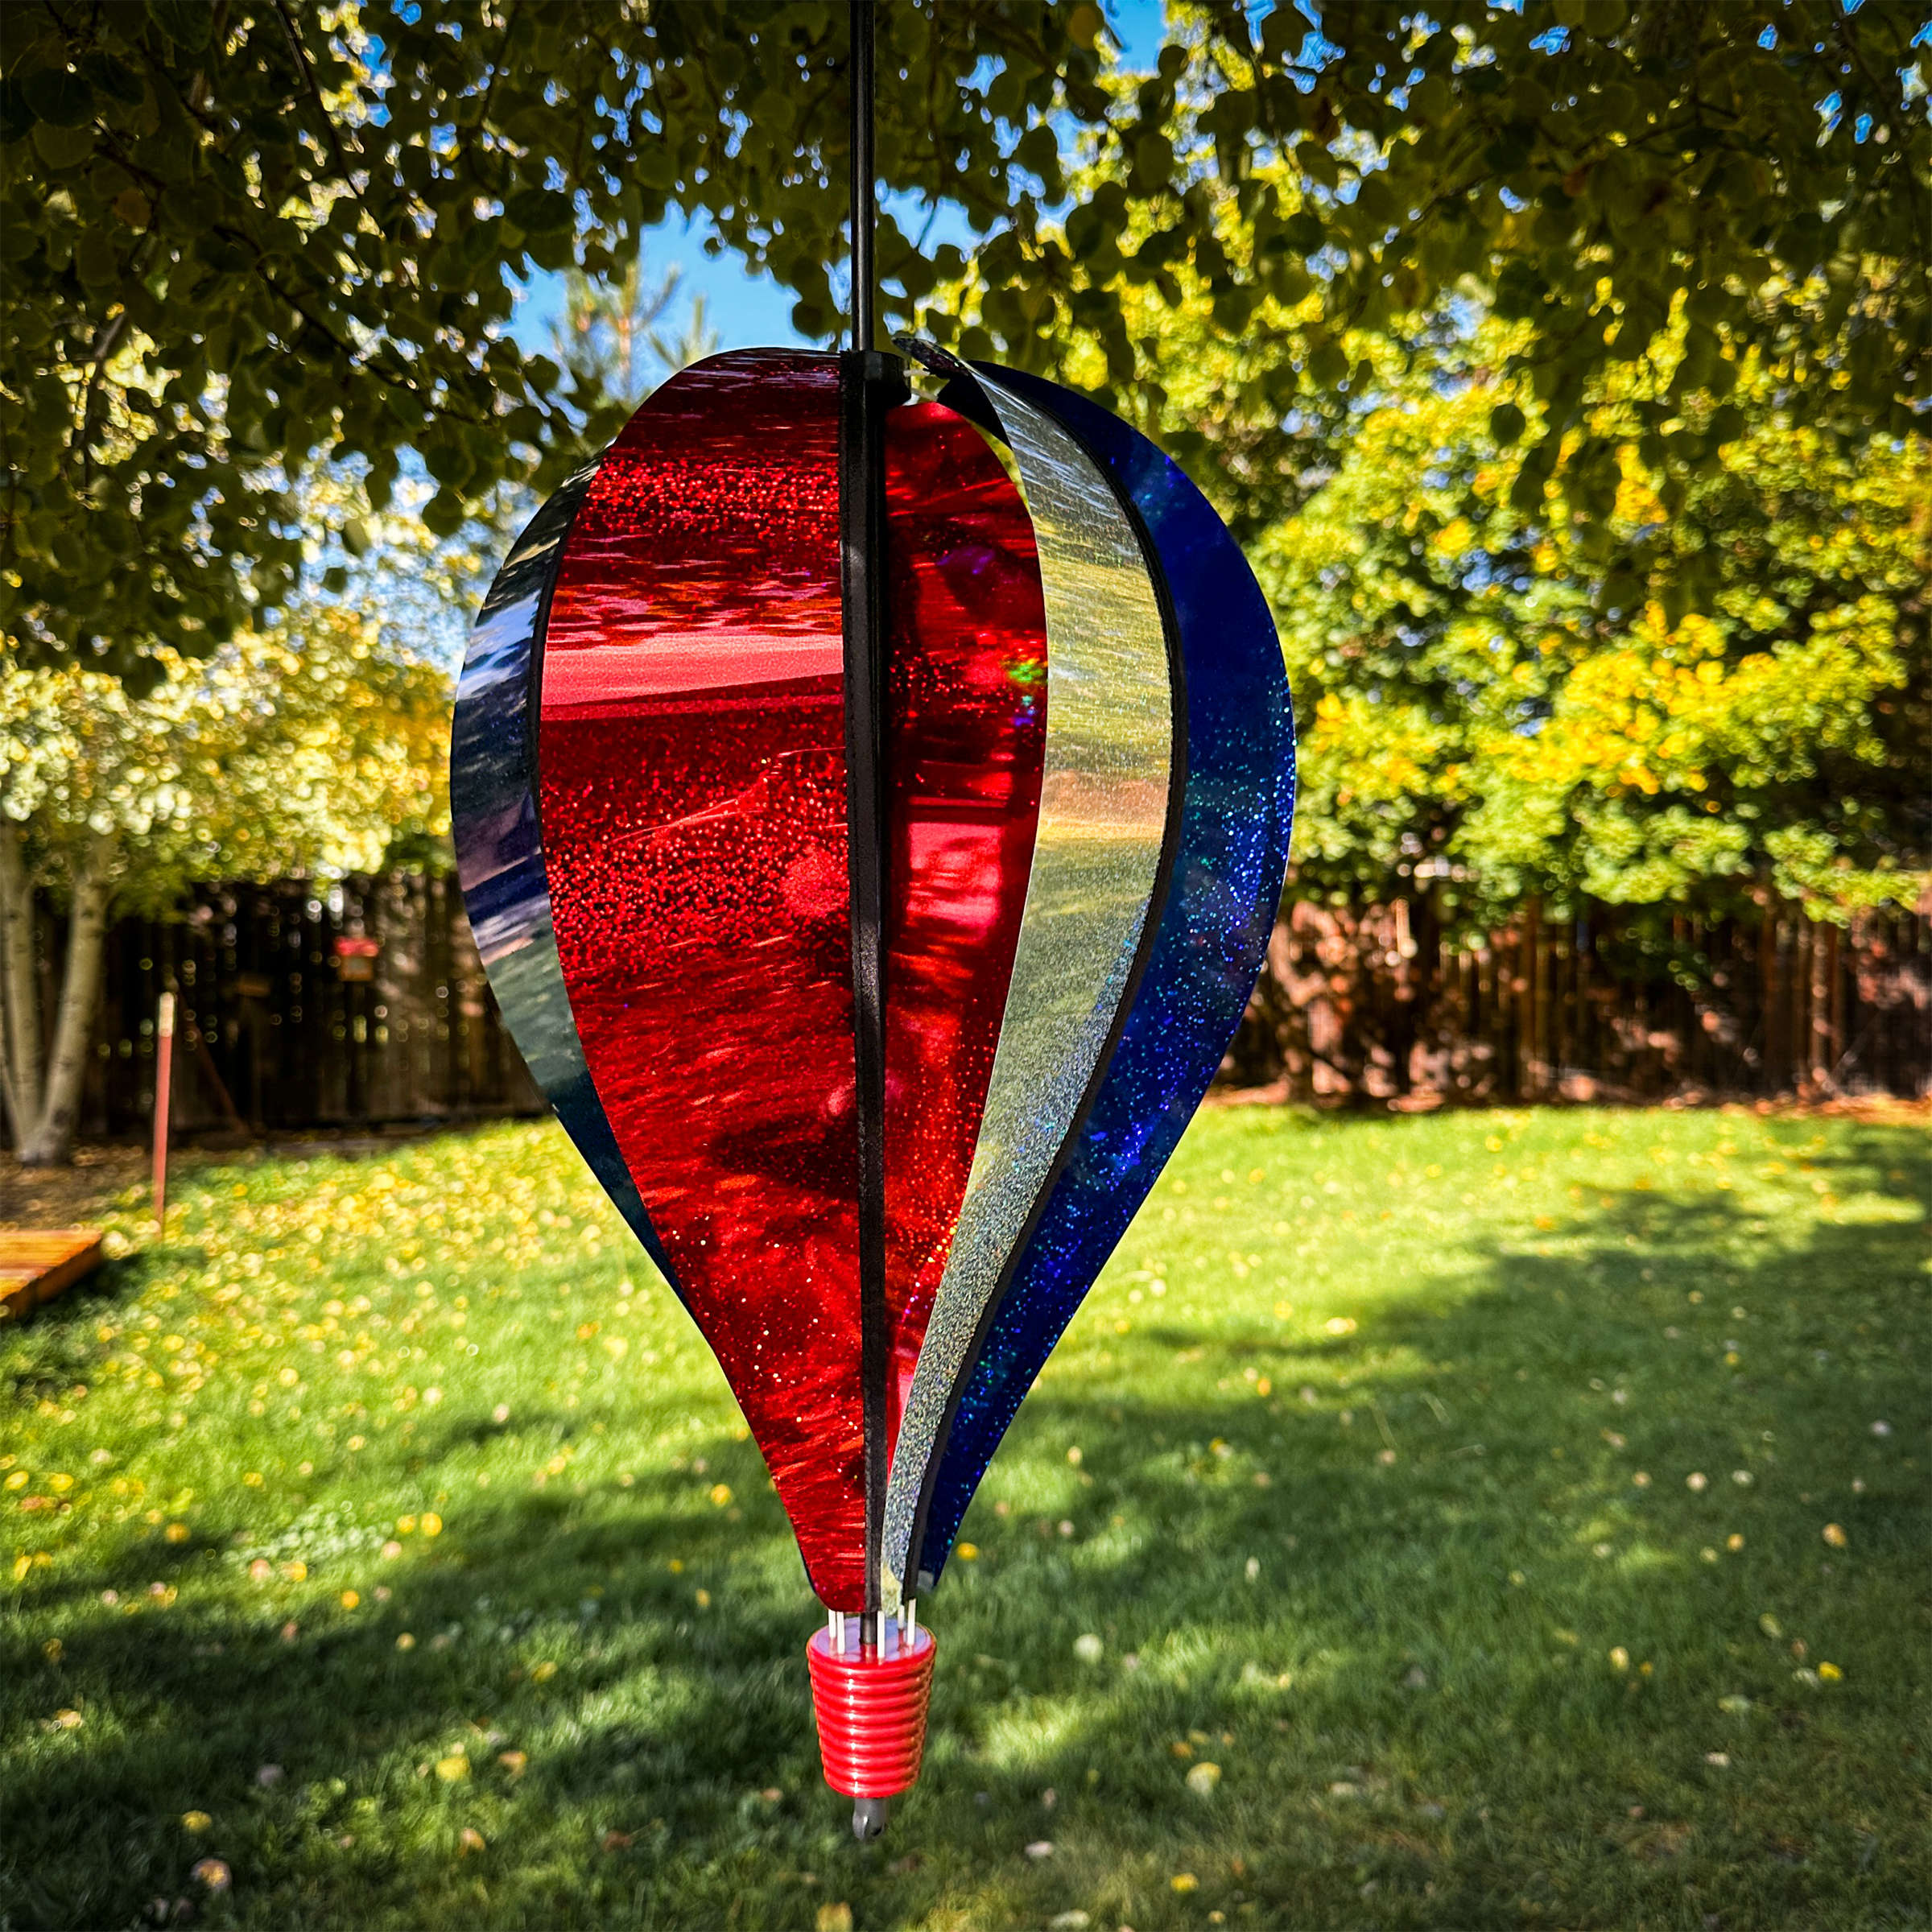 In the Breeze 1084 — Patriot Sparkler 6 Panel Hot Air Balloon 12"W x 18"H x 12"D, Colorful Mylar Patriotic Garden Spinner - image 4 of 4